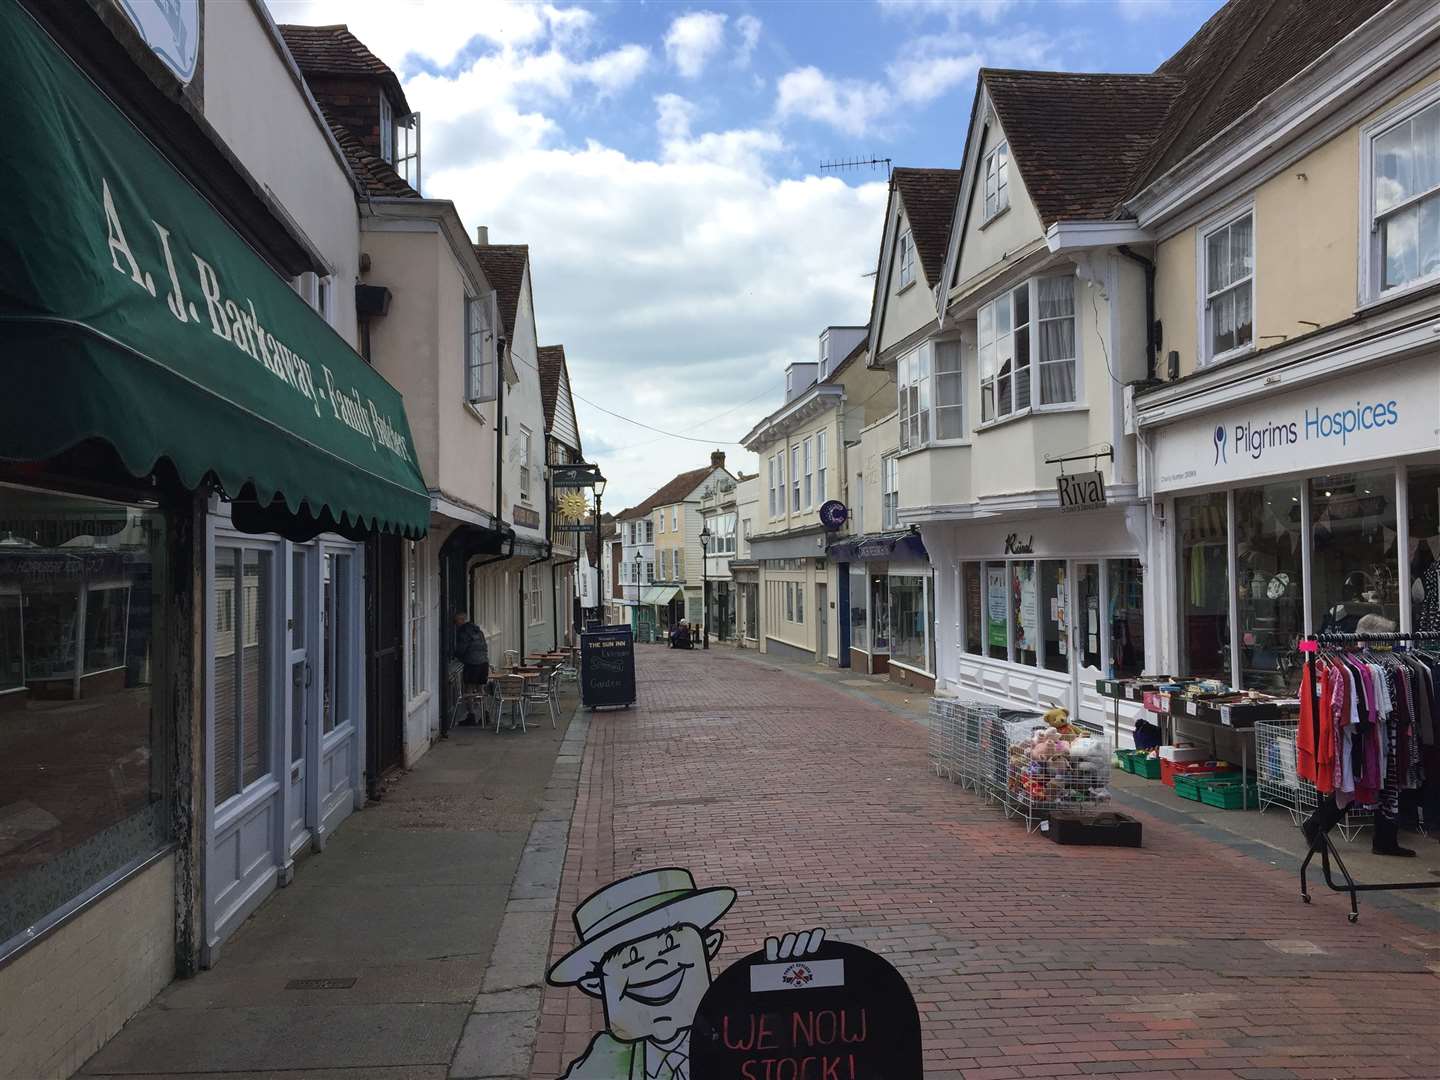 West Street in Faversham is occupied by a number of independent traders